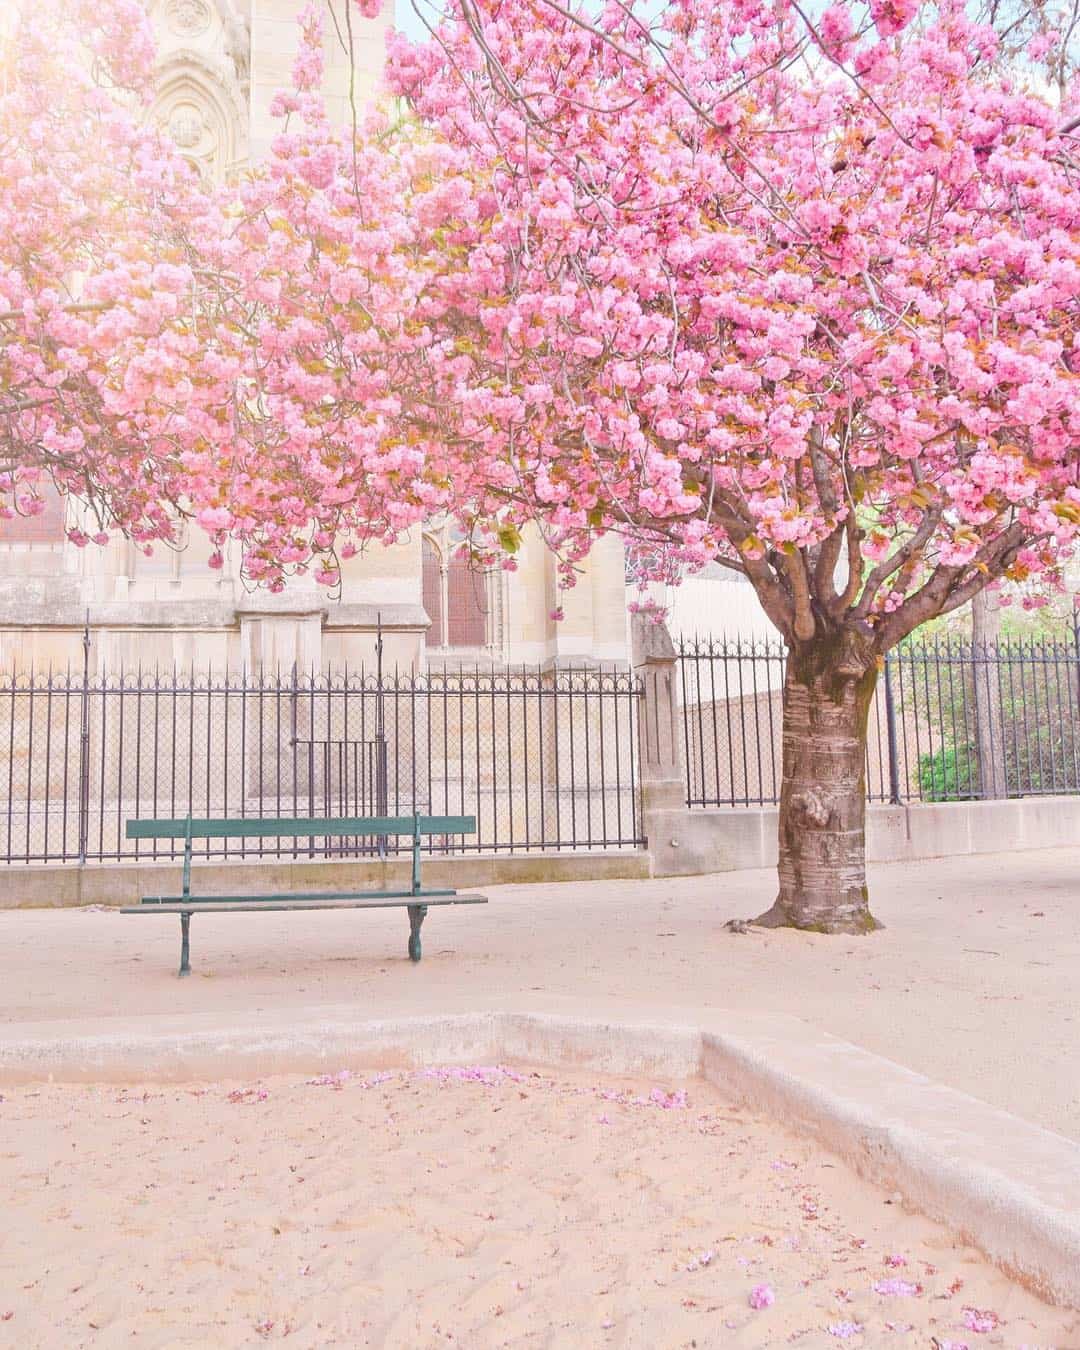 Best places to see the Cherry blossoms in Paris